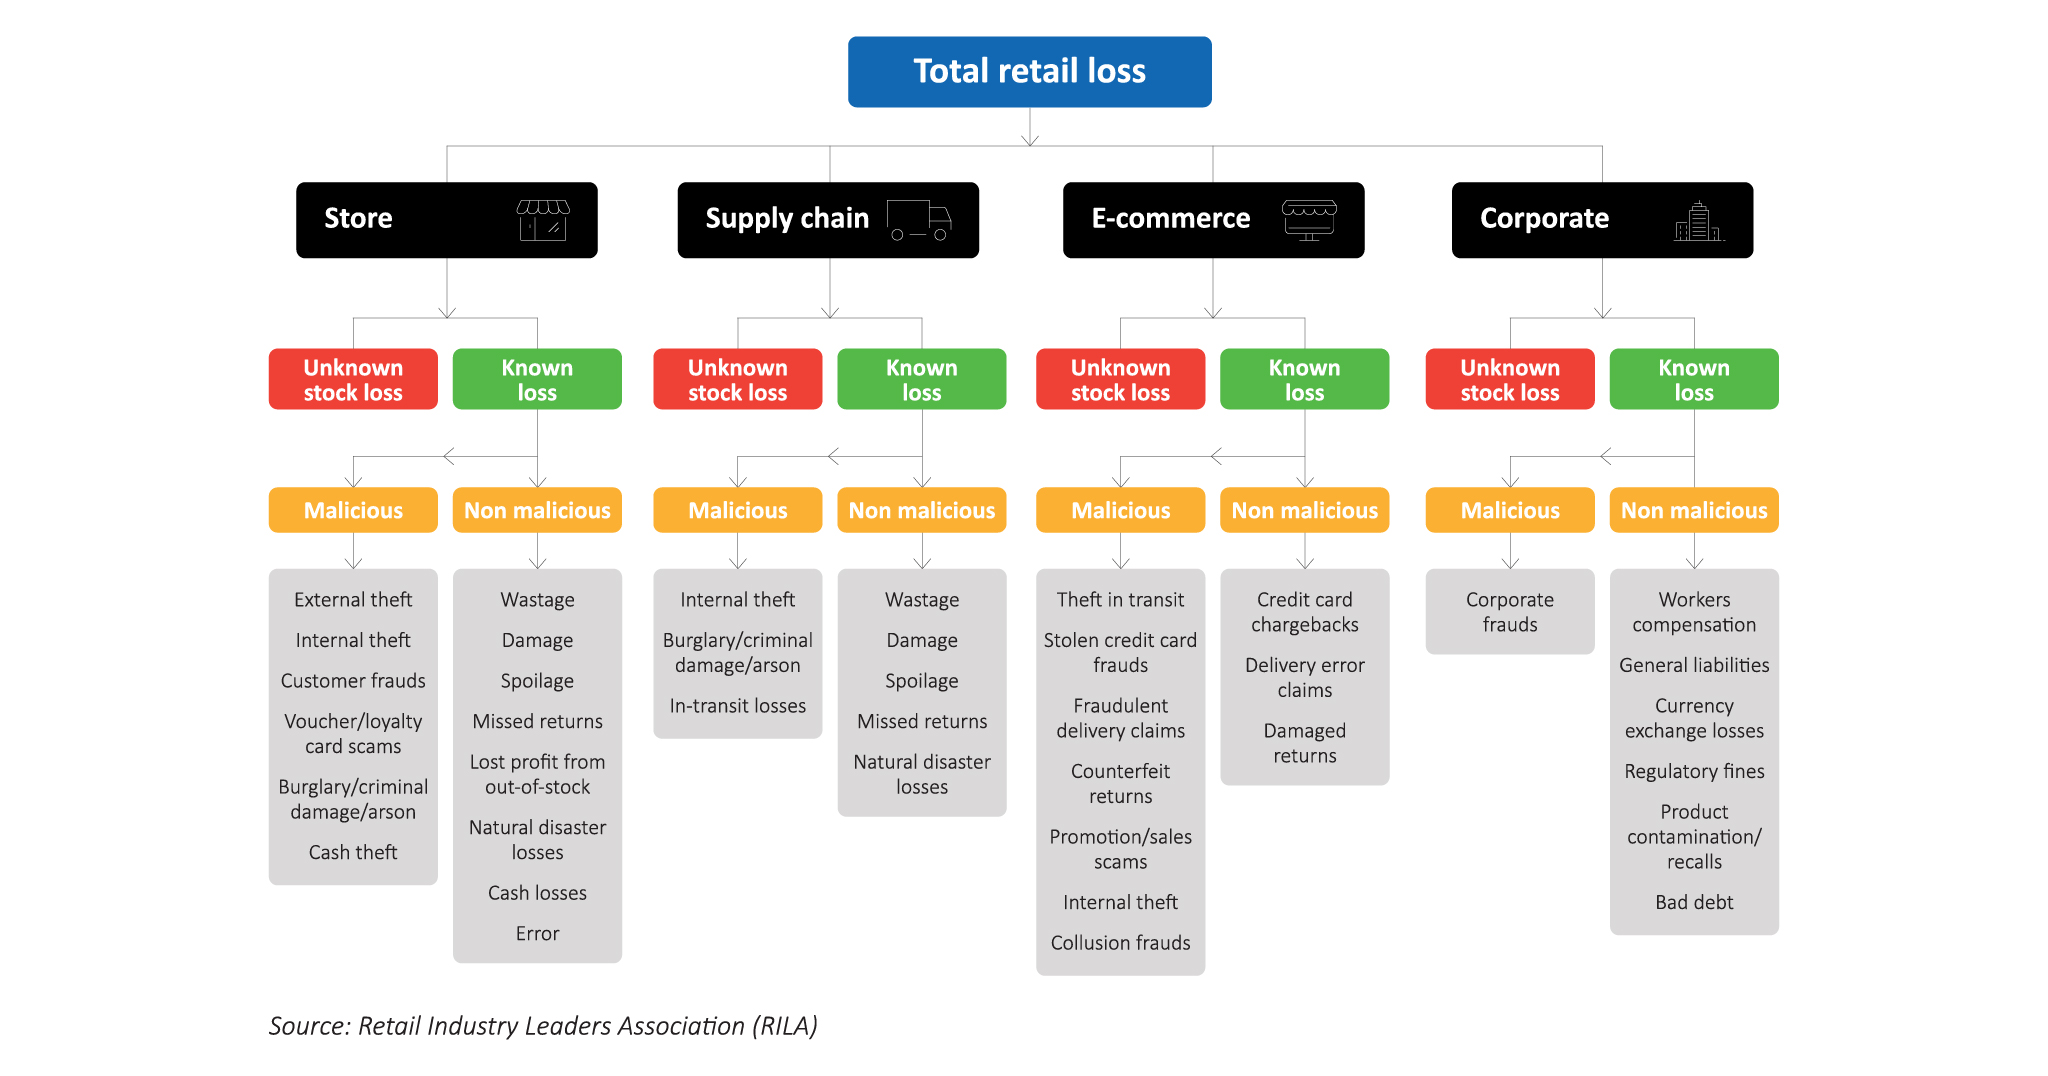 The typology of total retail loss